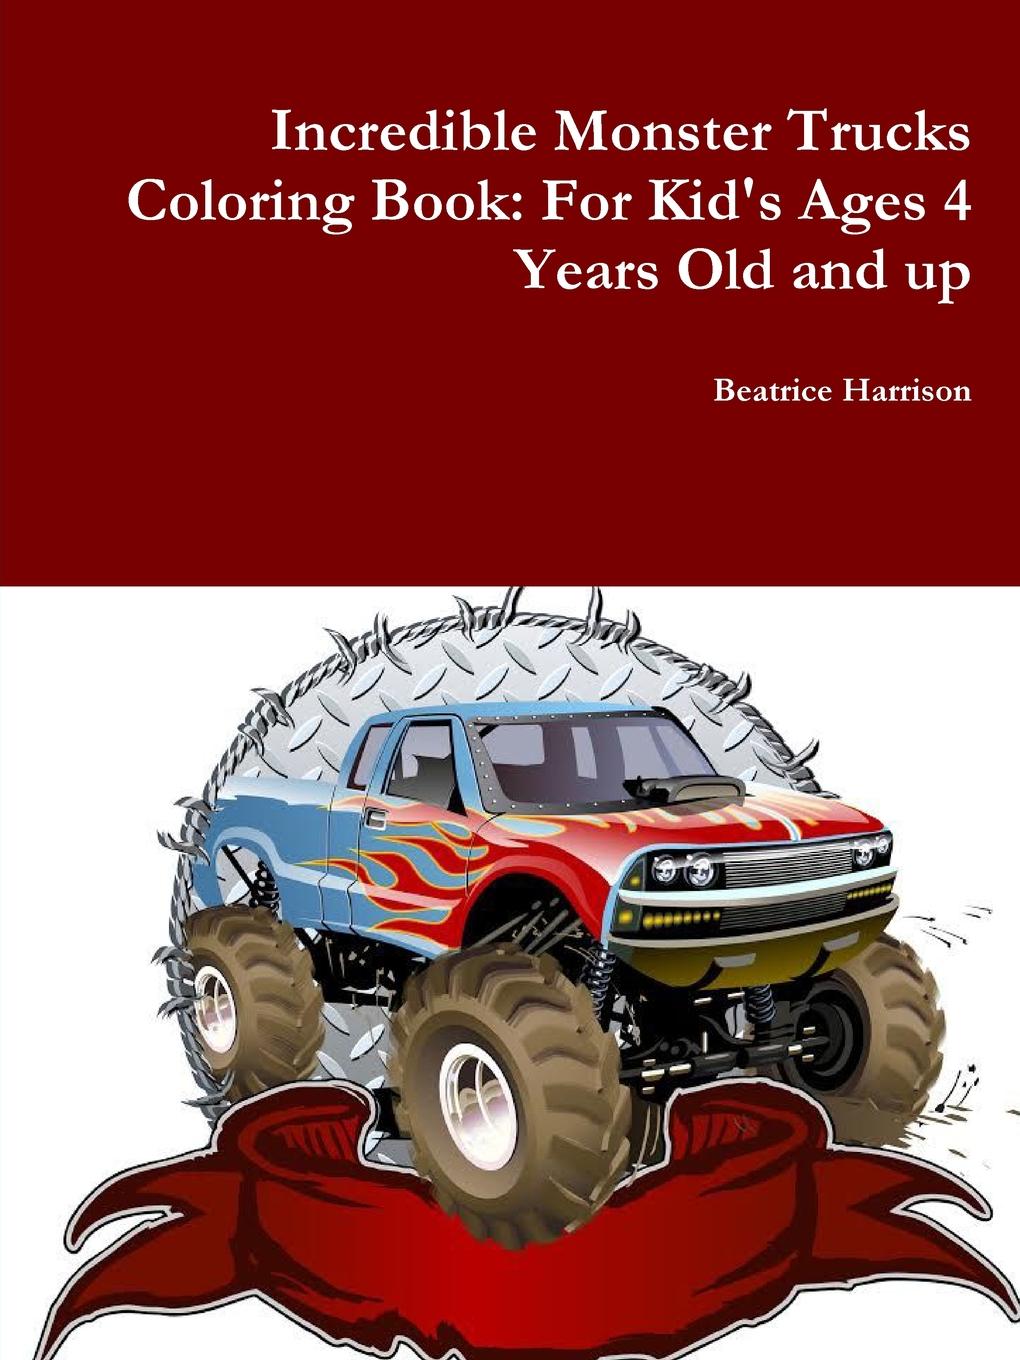 Beatrice Harrison Incredible Monster Trucks Coloring Book. For Kid.s Ages 4 Years Old and up